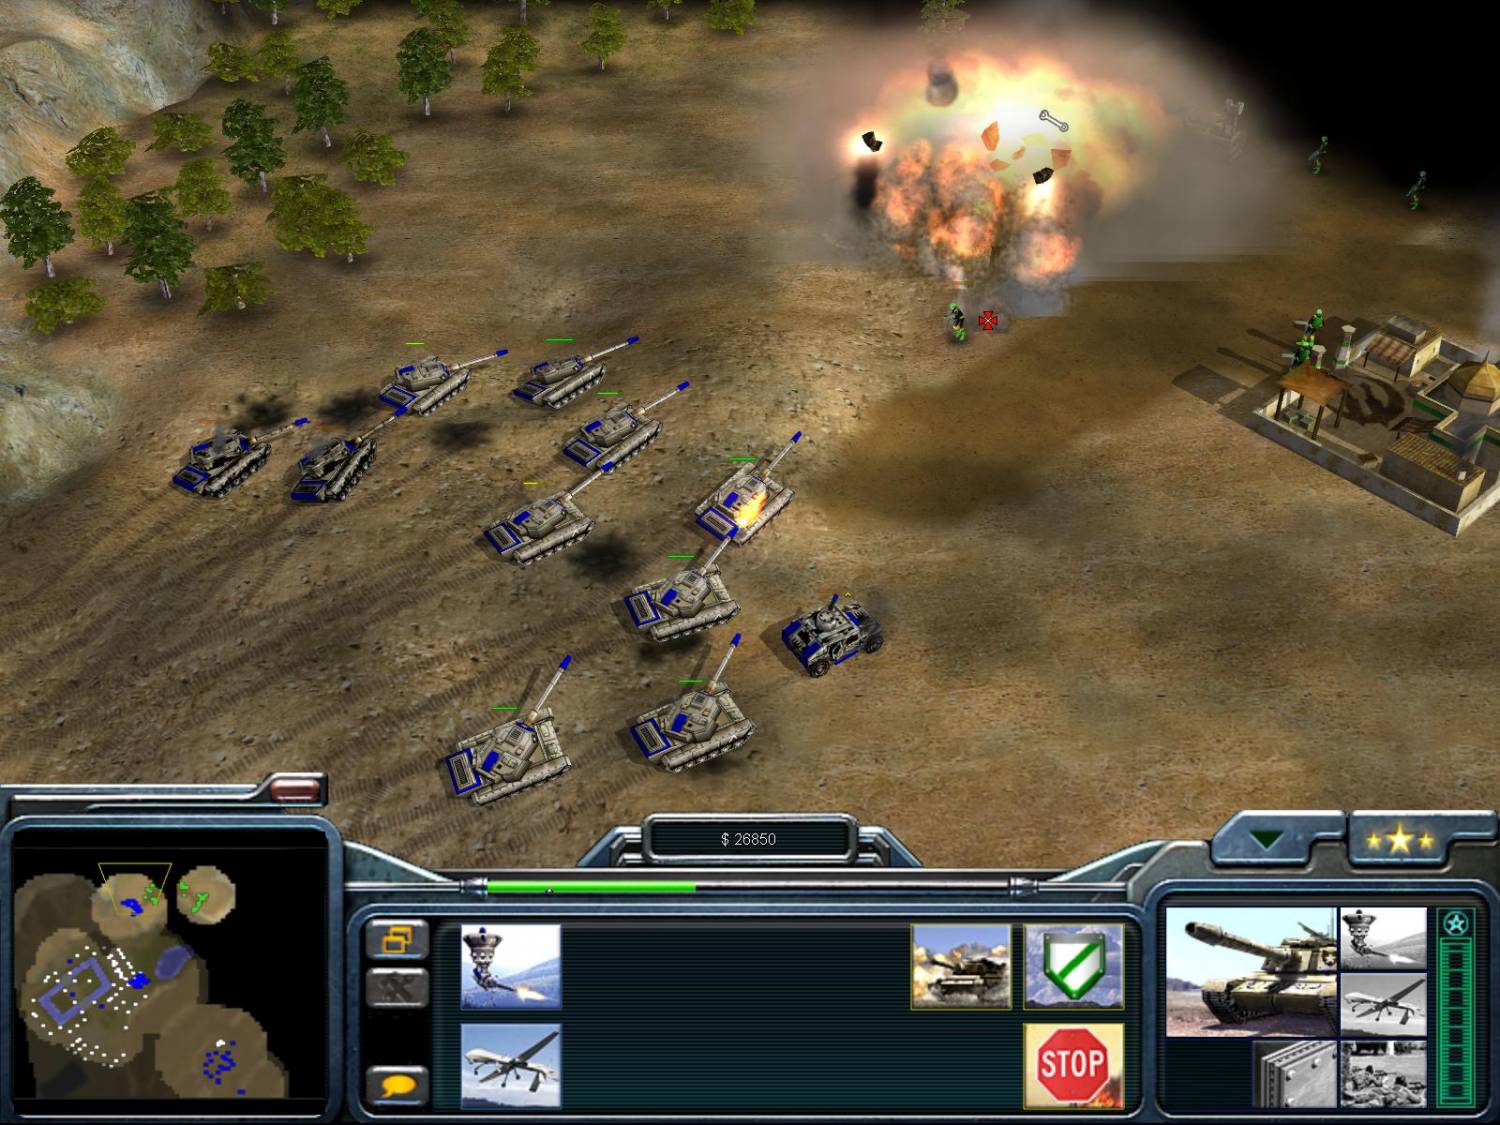 Command them. Command and Conquer 1. Command & Conquer: the first decade. Command Conquer 1995. Commander and Conquer 1.